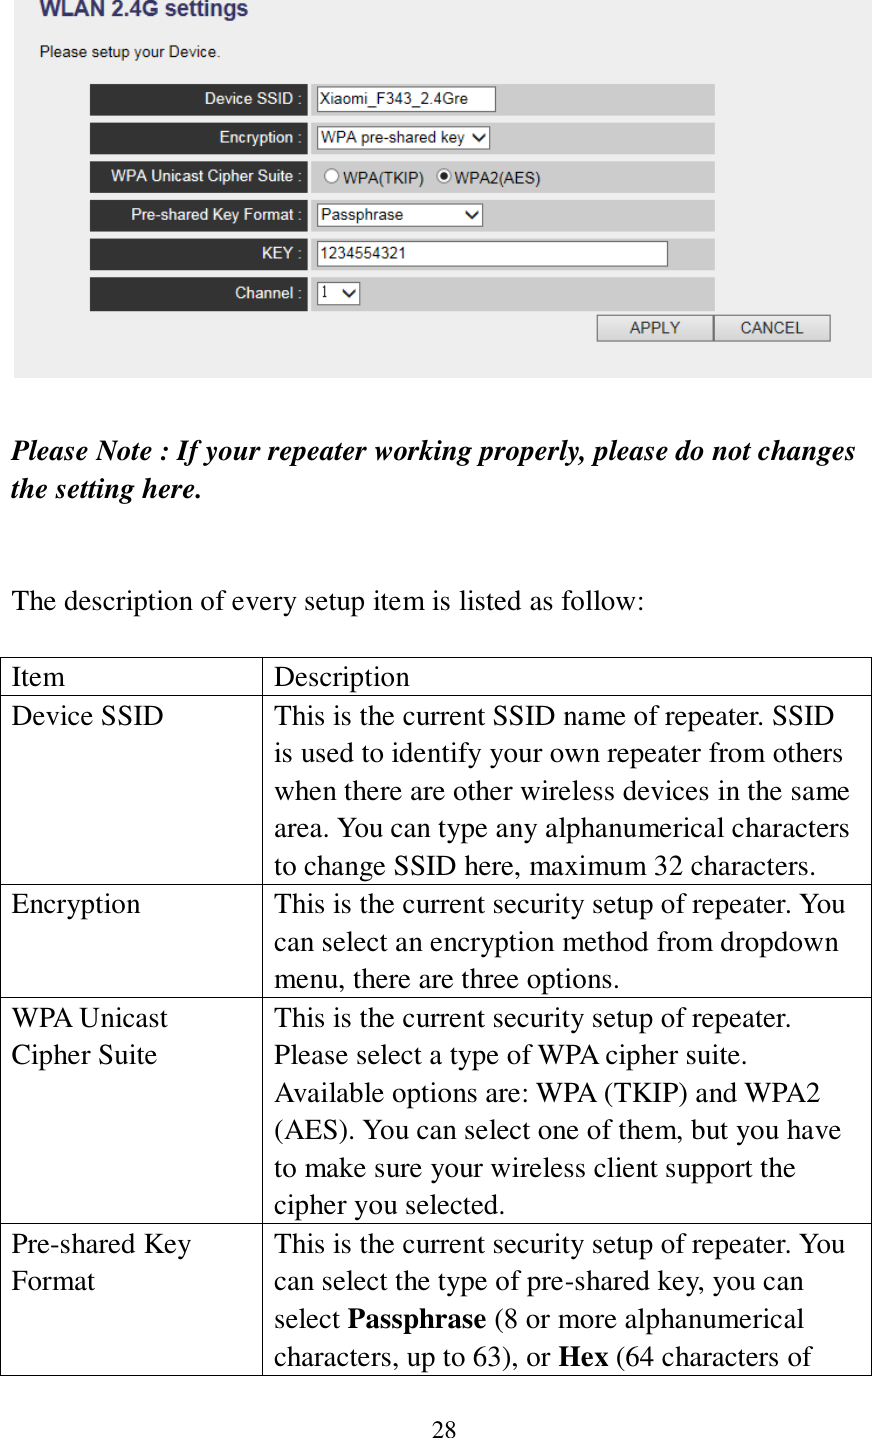 28   Please Note : If your repeater working properly, please do not changes the setting here.   The description of every setup item is listed as follow:  Item Description Device SSID This is the current SSID name of repeater. SSID is used to identify your own repeater from others when there are other wireless devices in the same area. You can type any alphanumerical characters to change SSID here, maximum 32 characters. Encryption This is the current security setup of repeater. You can select an encryption method from dropdown menu, there are three options. WPA Unicast Cipher Suite This is the current security setup of repeater. Please select a type of WPA cipher suite. Available options are: WPA (TKIP) and WPA2 (AES). You can select one of them, but you have to make sure your wireless client support the cipher you selected. Pre-shared Key Format This is the current security setup of repeater. You can select the type of pre-shared key, you can select Passphrase (8 or more alphanumerical characters, up to 63), or Hex (64 characters of 